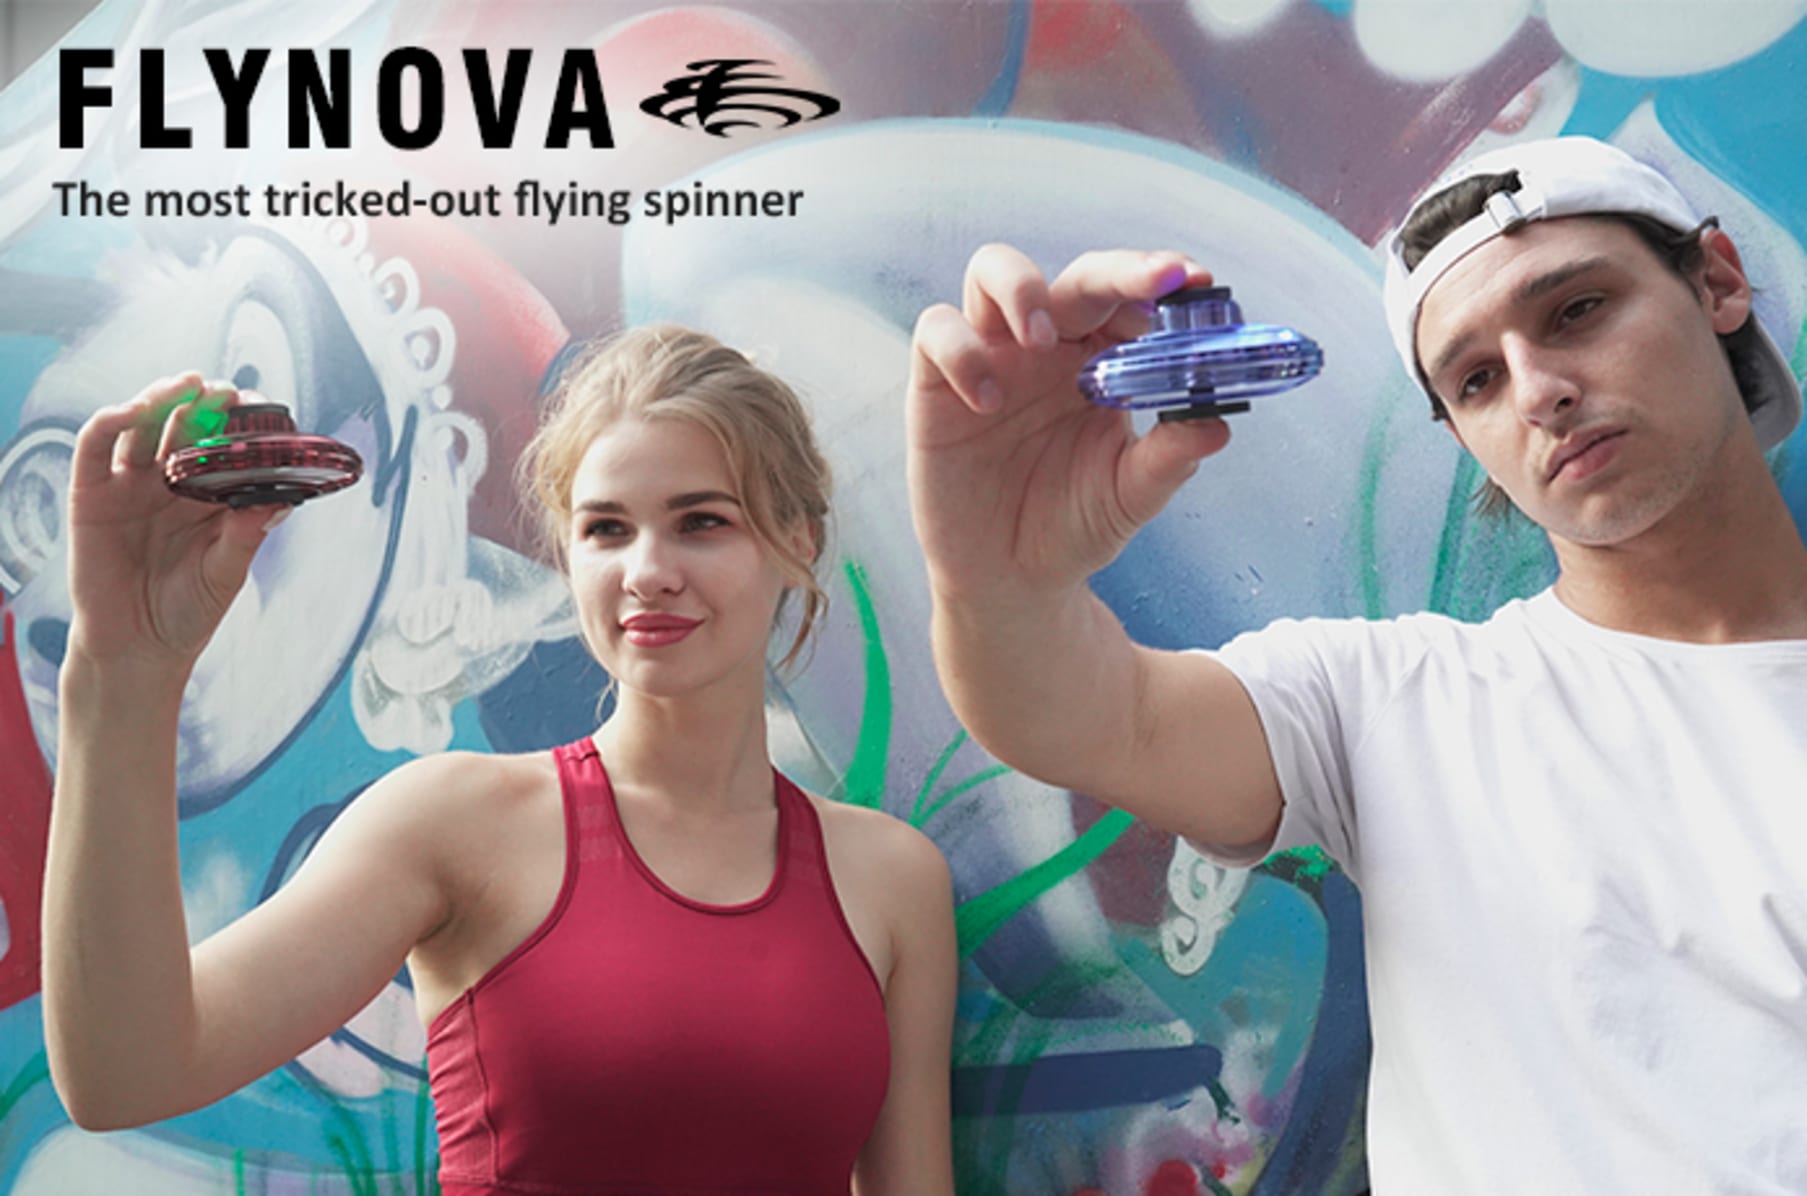 The most tricked-out flying spinner